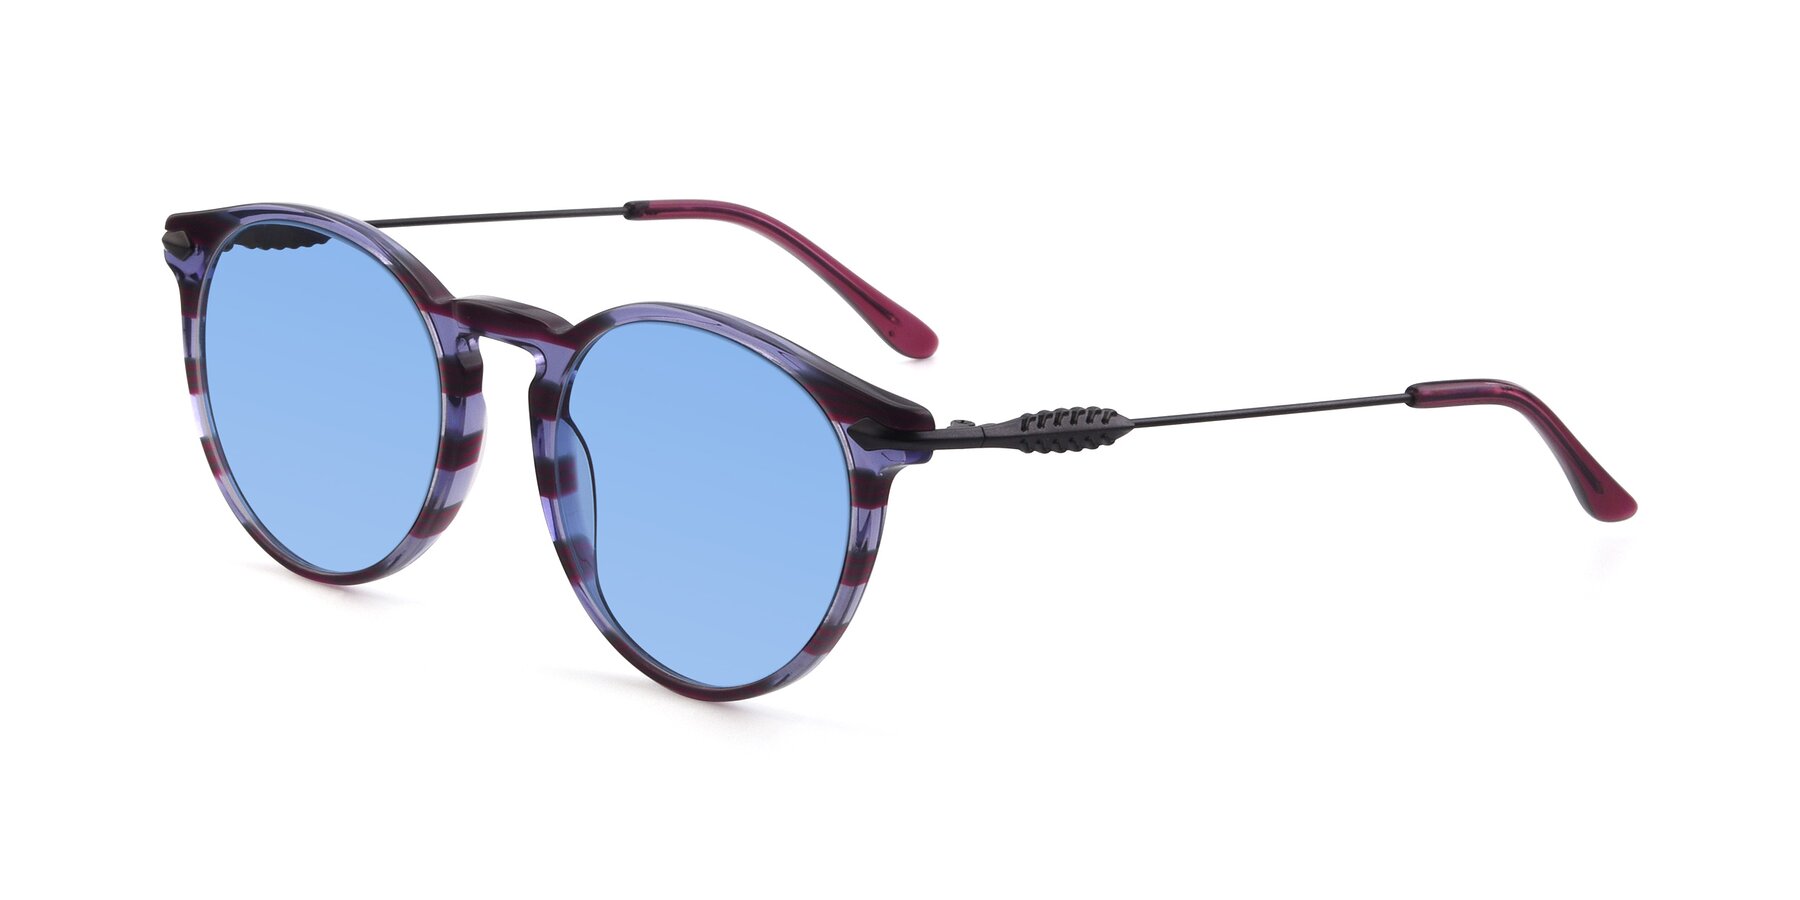 Angle of 17660 in Stripe Purple with Medium Blue Tinted Lenses